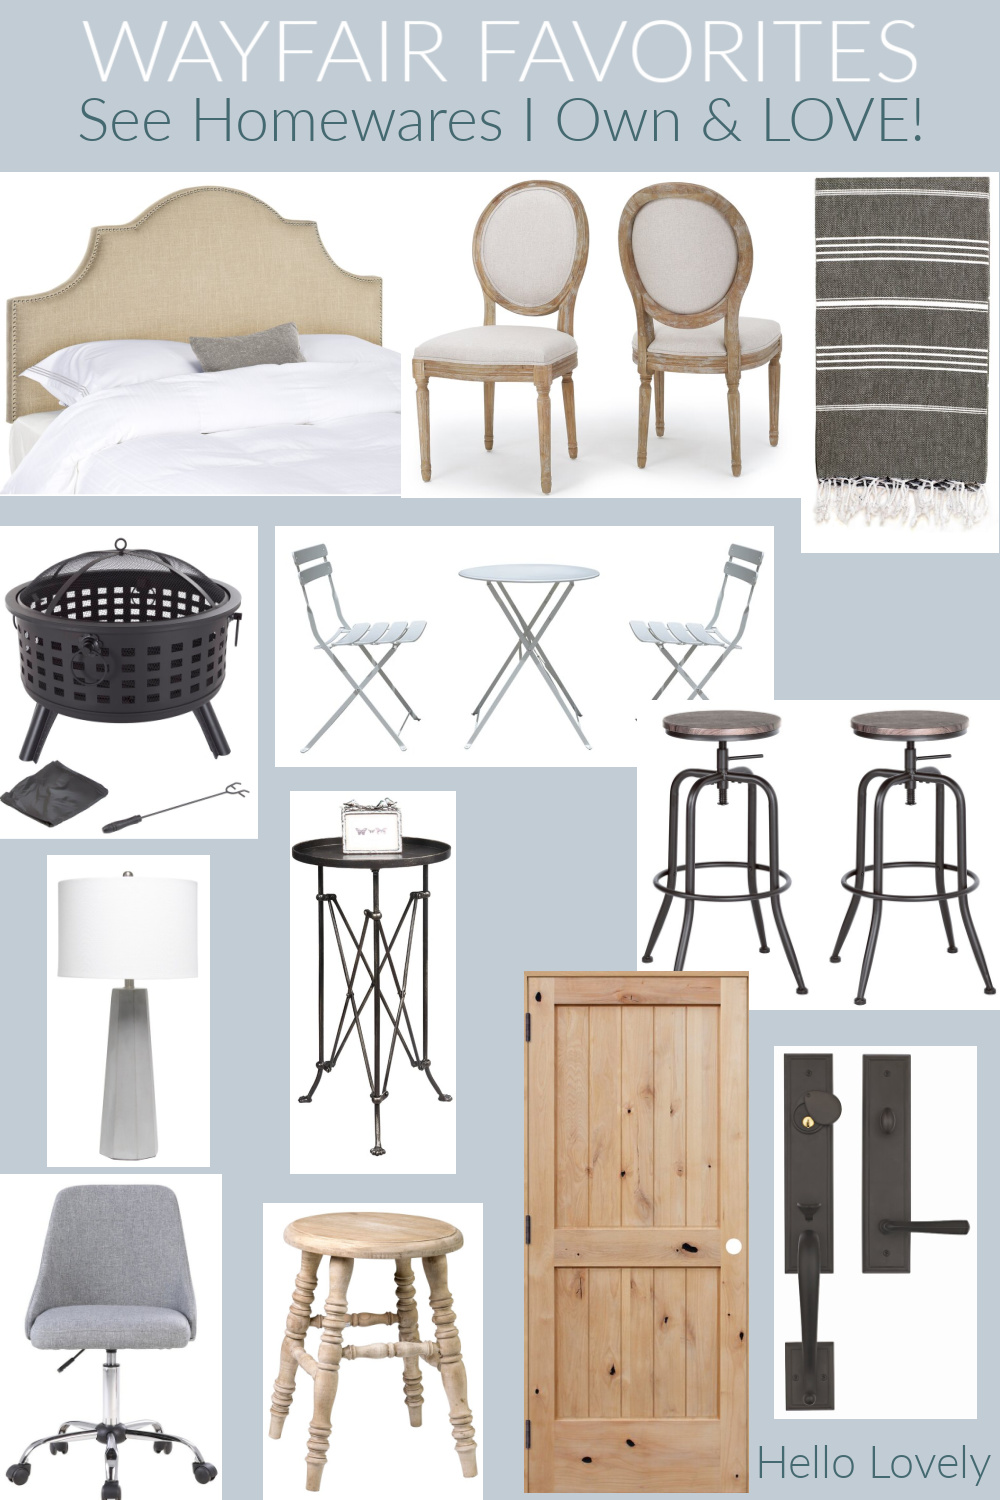 Wayfair Favorites: See homewares I own and love - Hello Lovely!